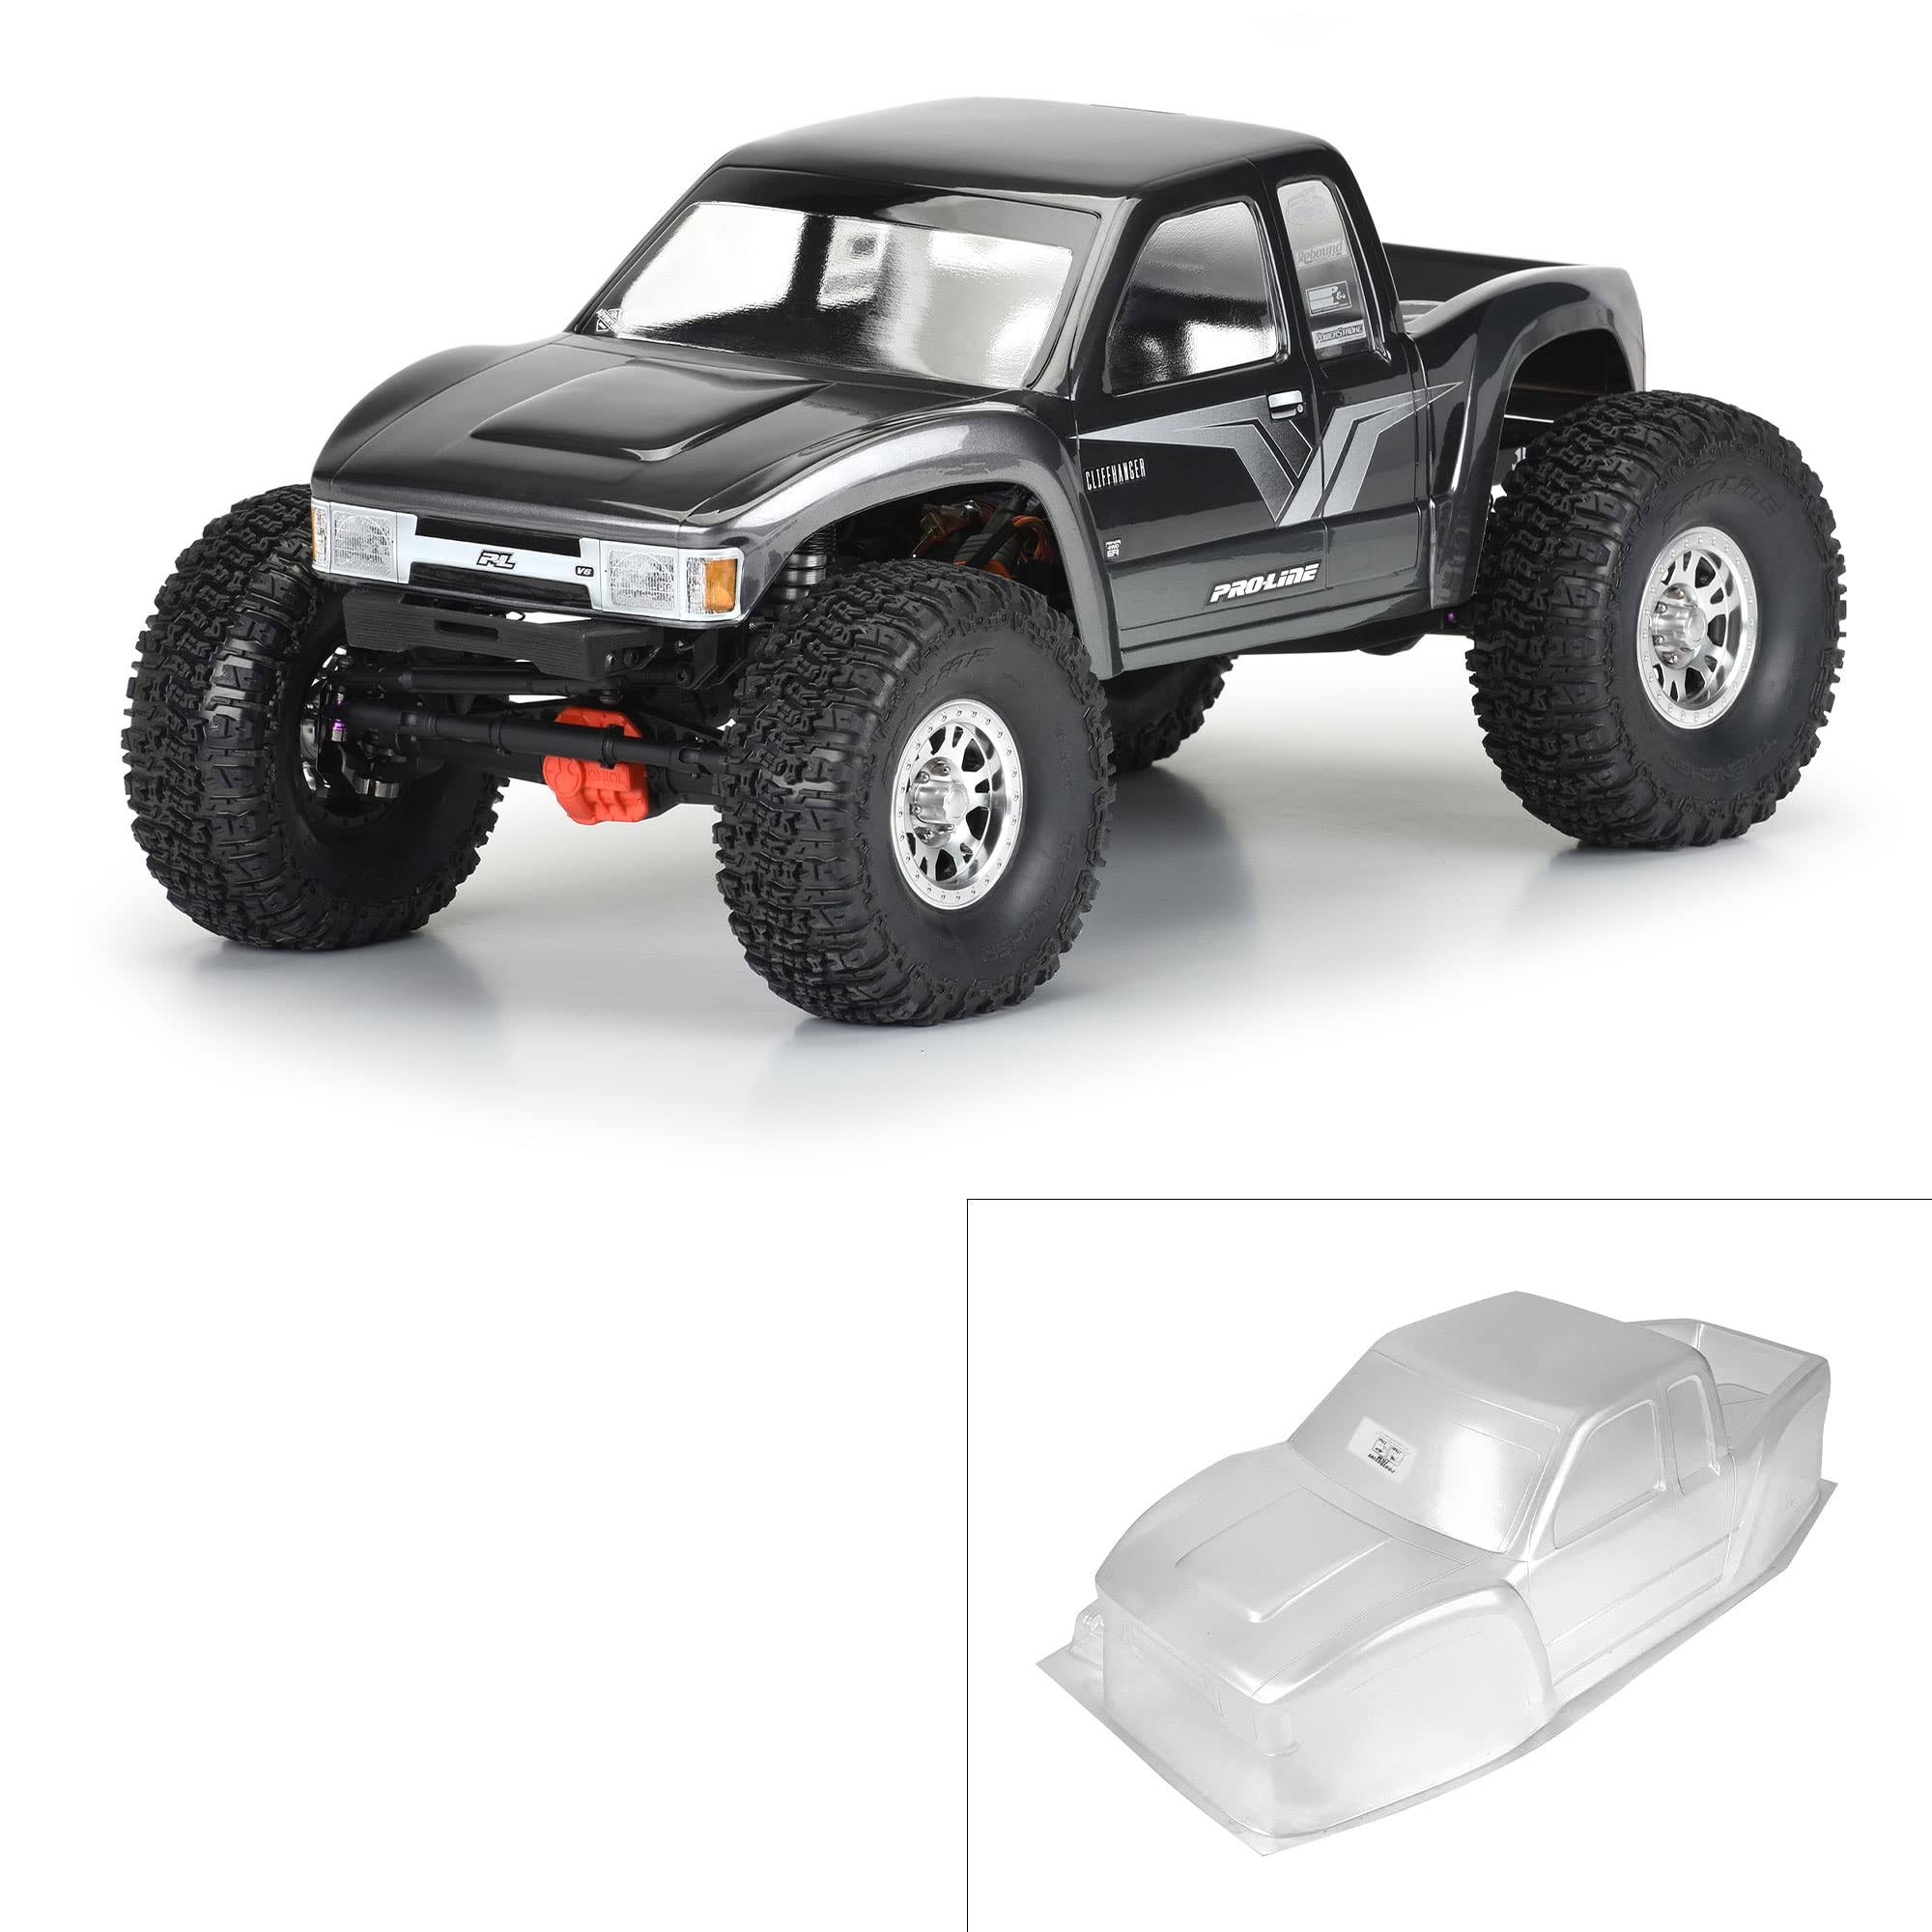 Pro-line Racing 1/10 Cliffhanger High Performance Clear Body with 12.3" (313mm) Wheelbase: Scale Crawlers, PRO356600